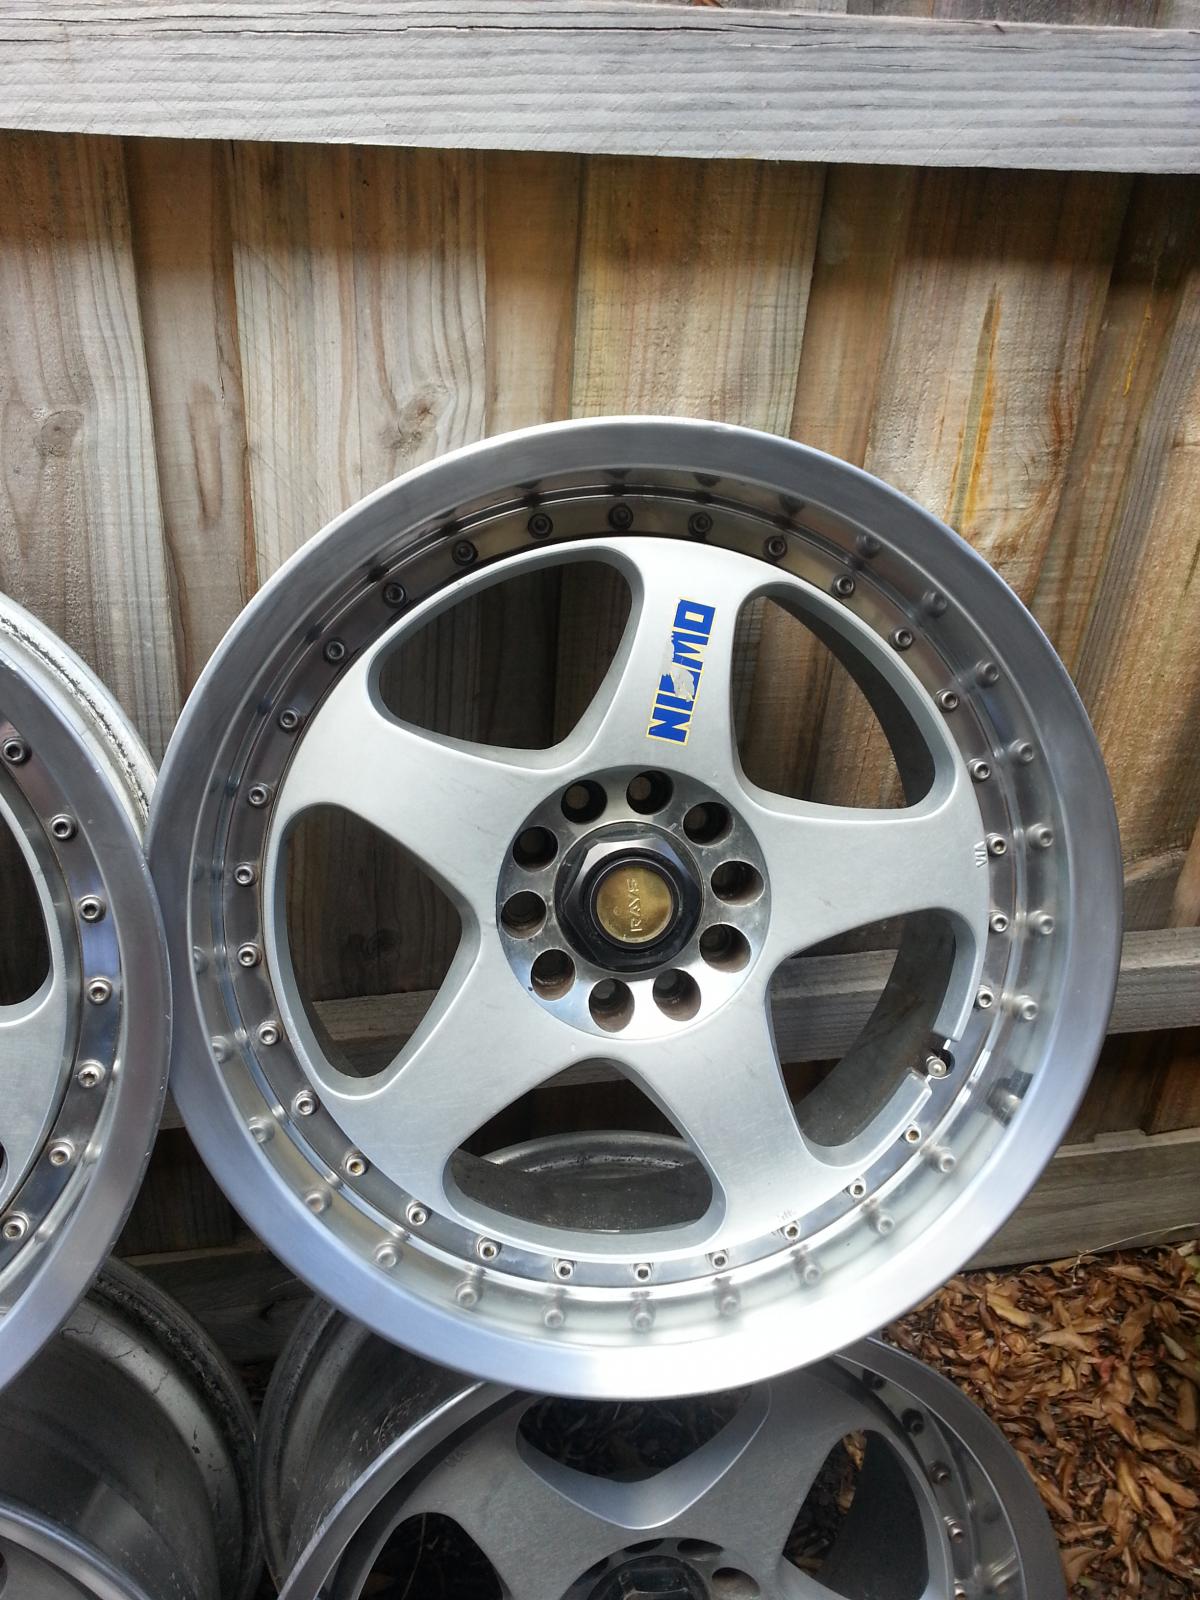 Brand: NISMO Model:LMGT2 Tyres: x2 if you want them, BCT S800 235/45/17 (no...